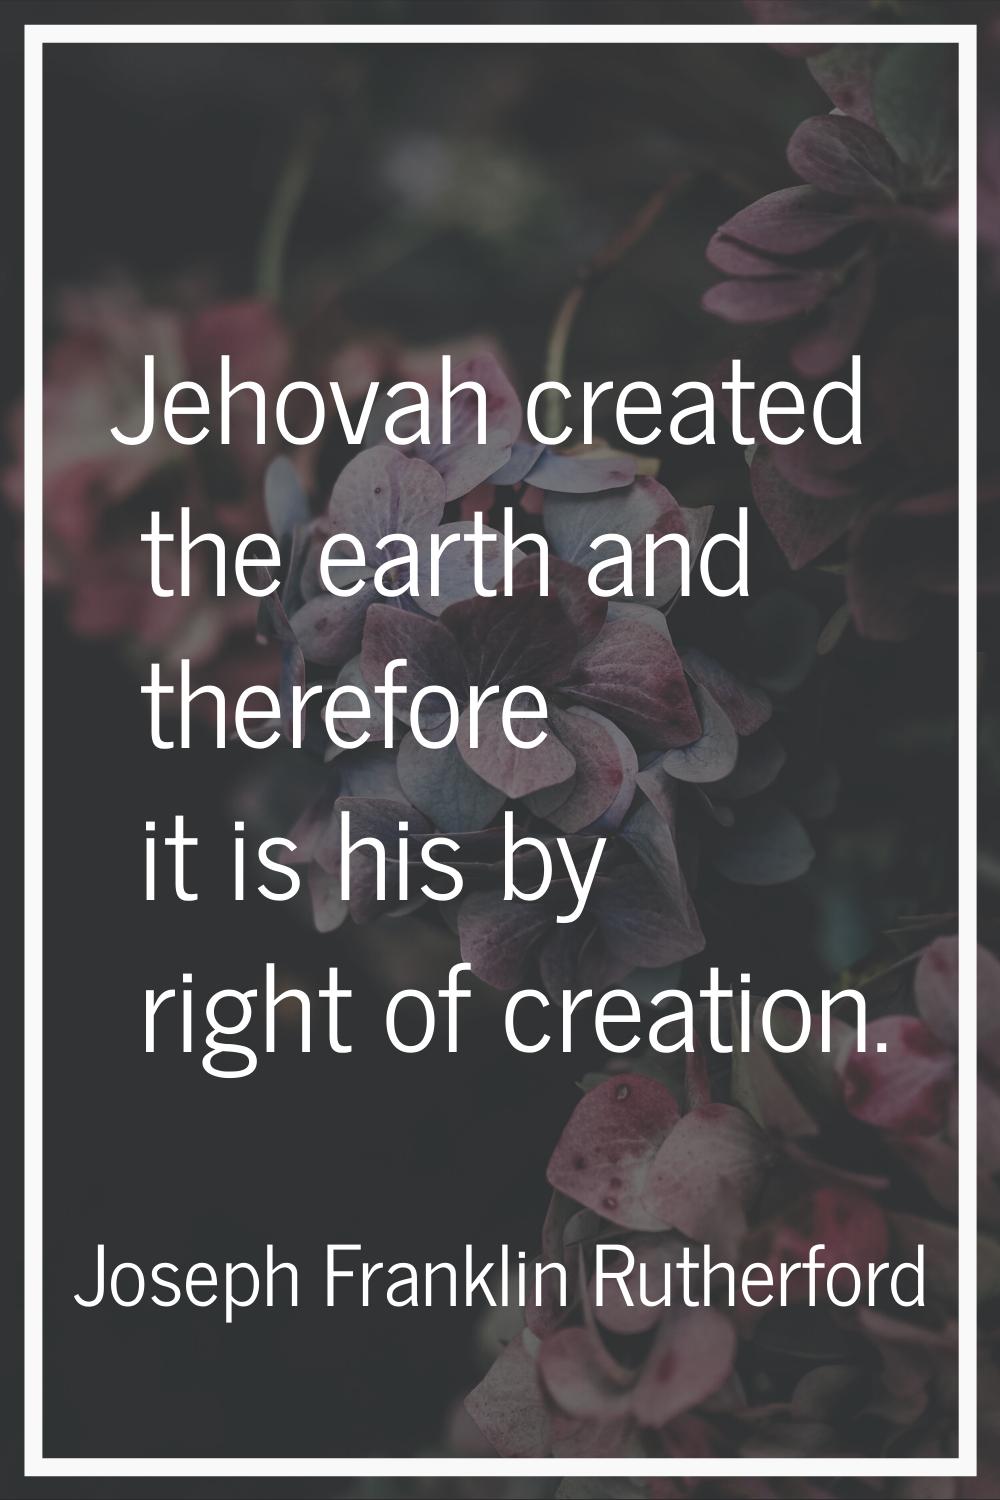 Jehovah created the earth and therefore it is his by right of creation.